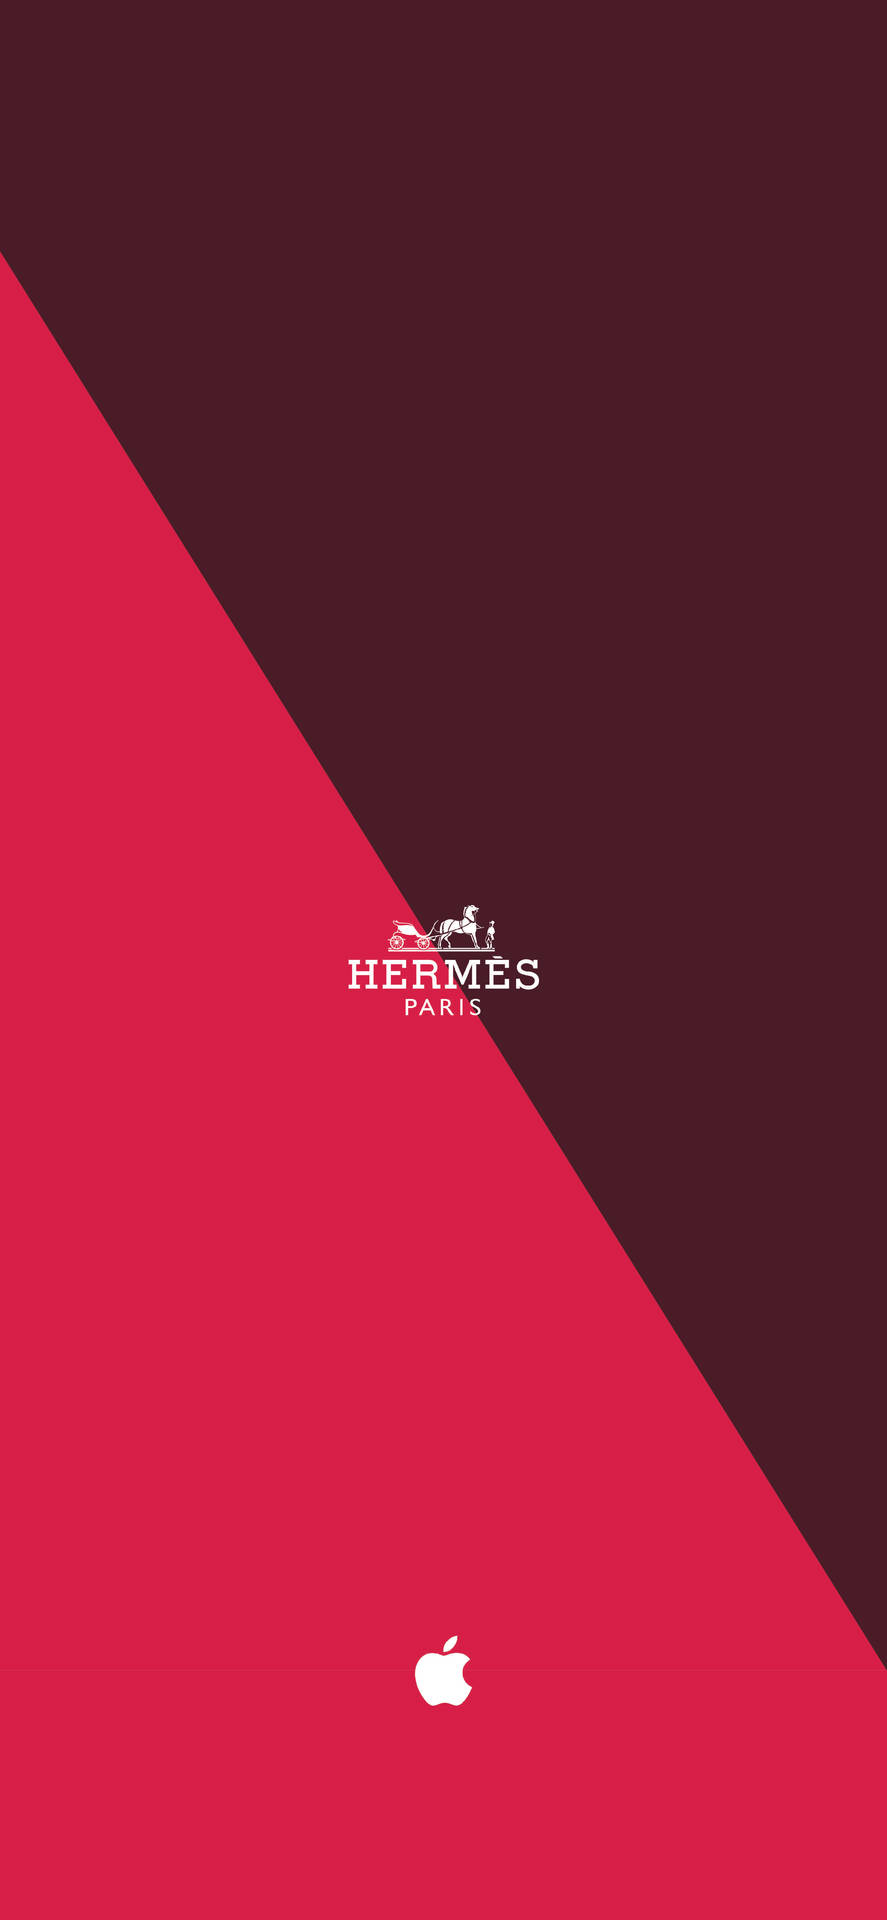 Duotone Hermes Pink And Maroon